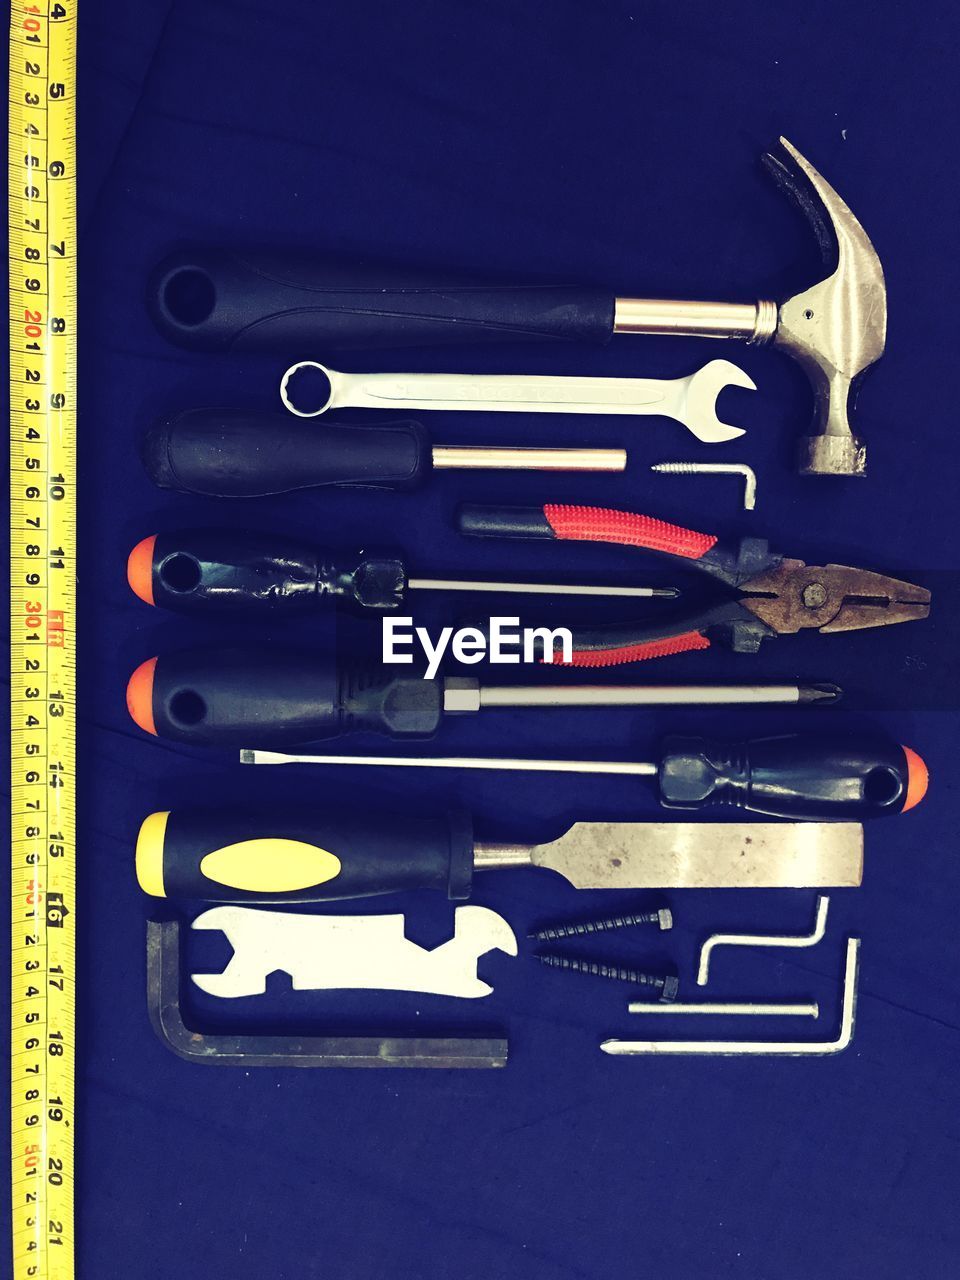 HIGH ANGLE VIEW OF TOOLS IN THE BOX